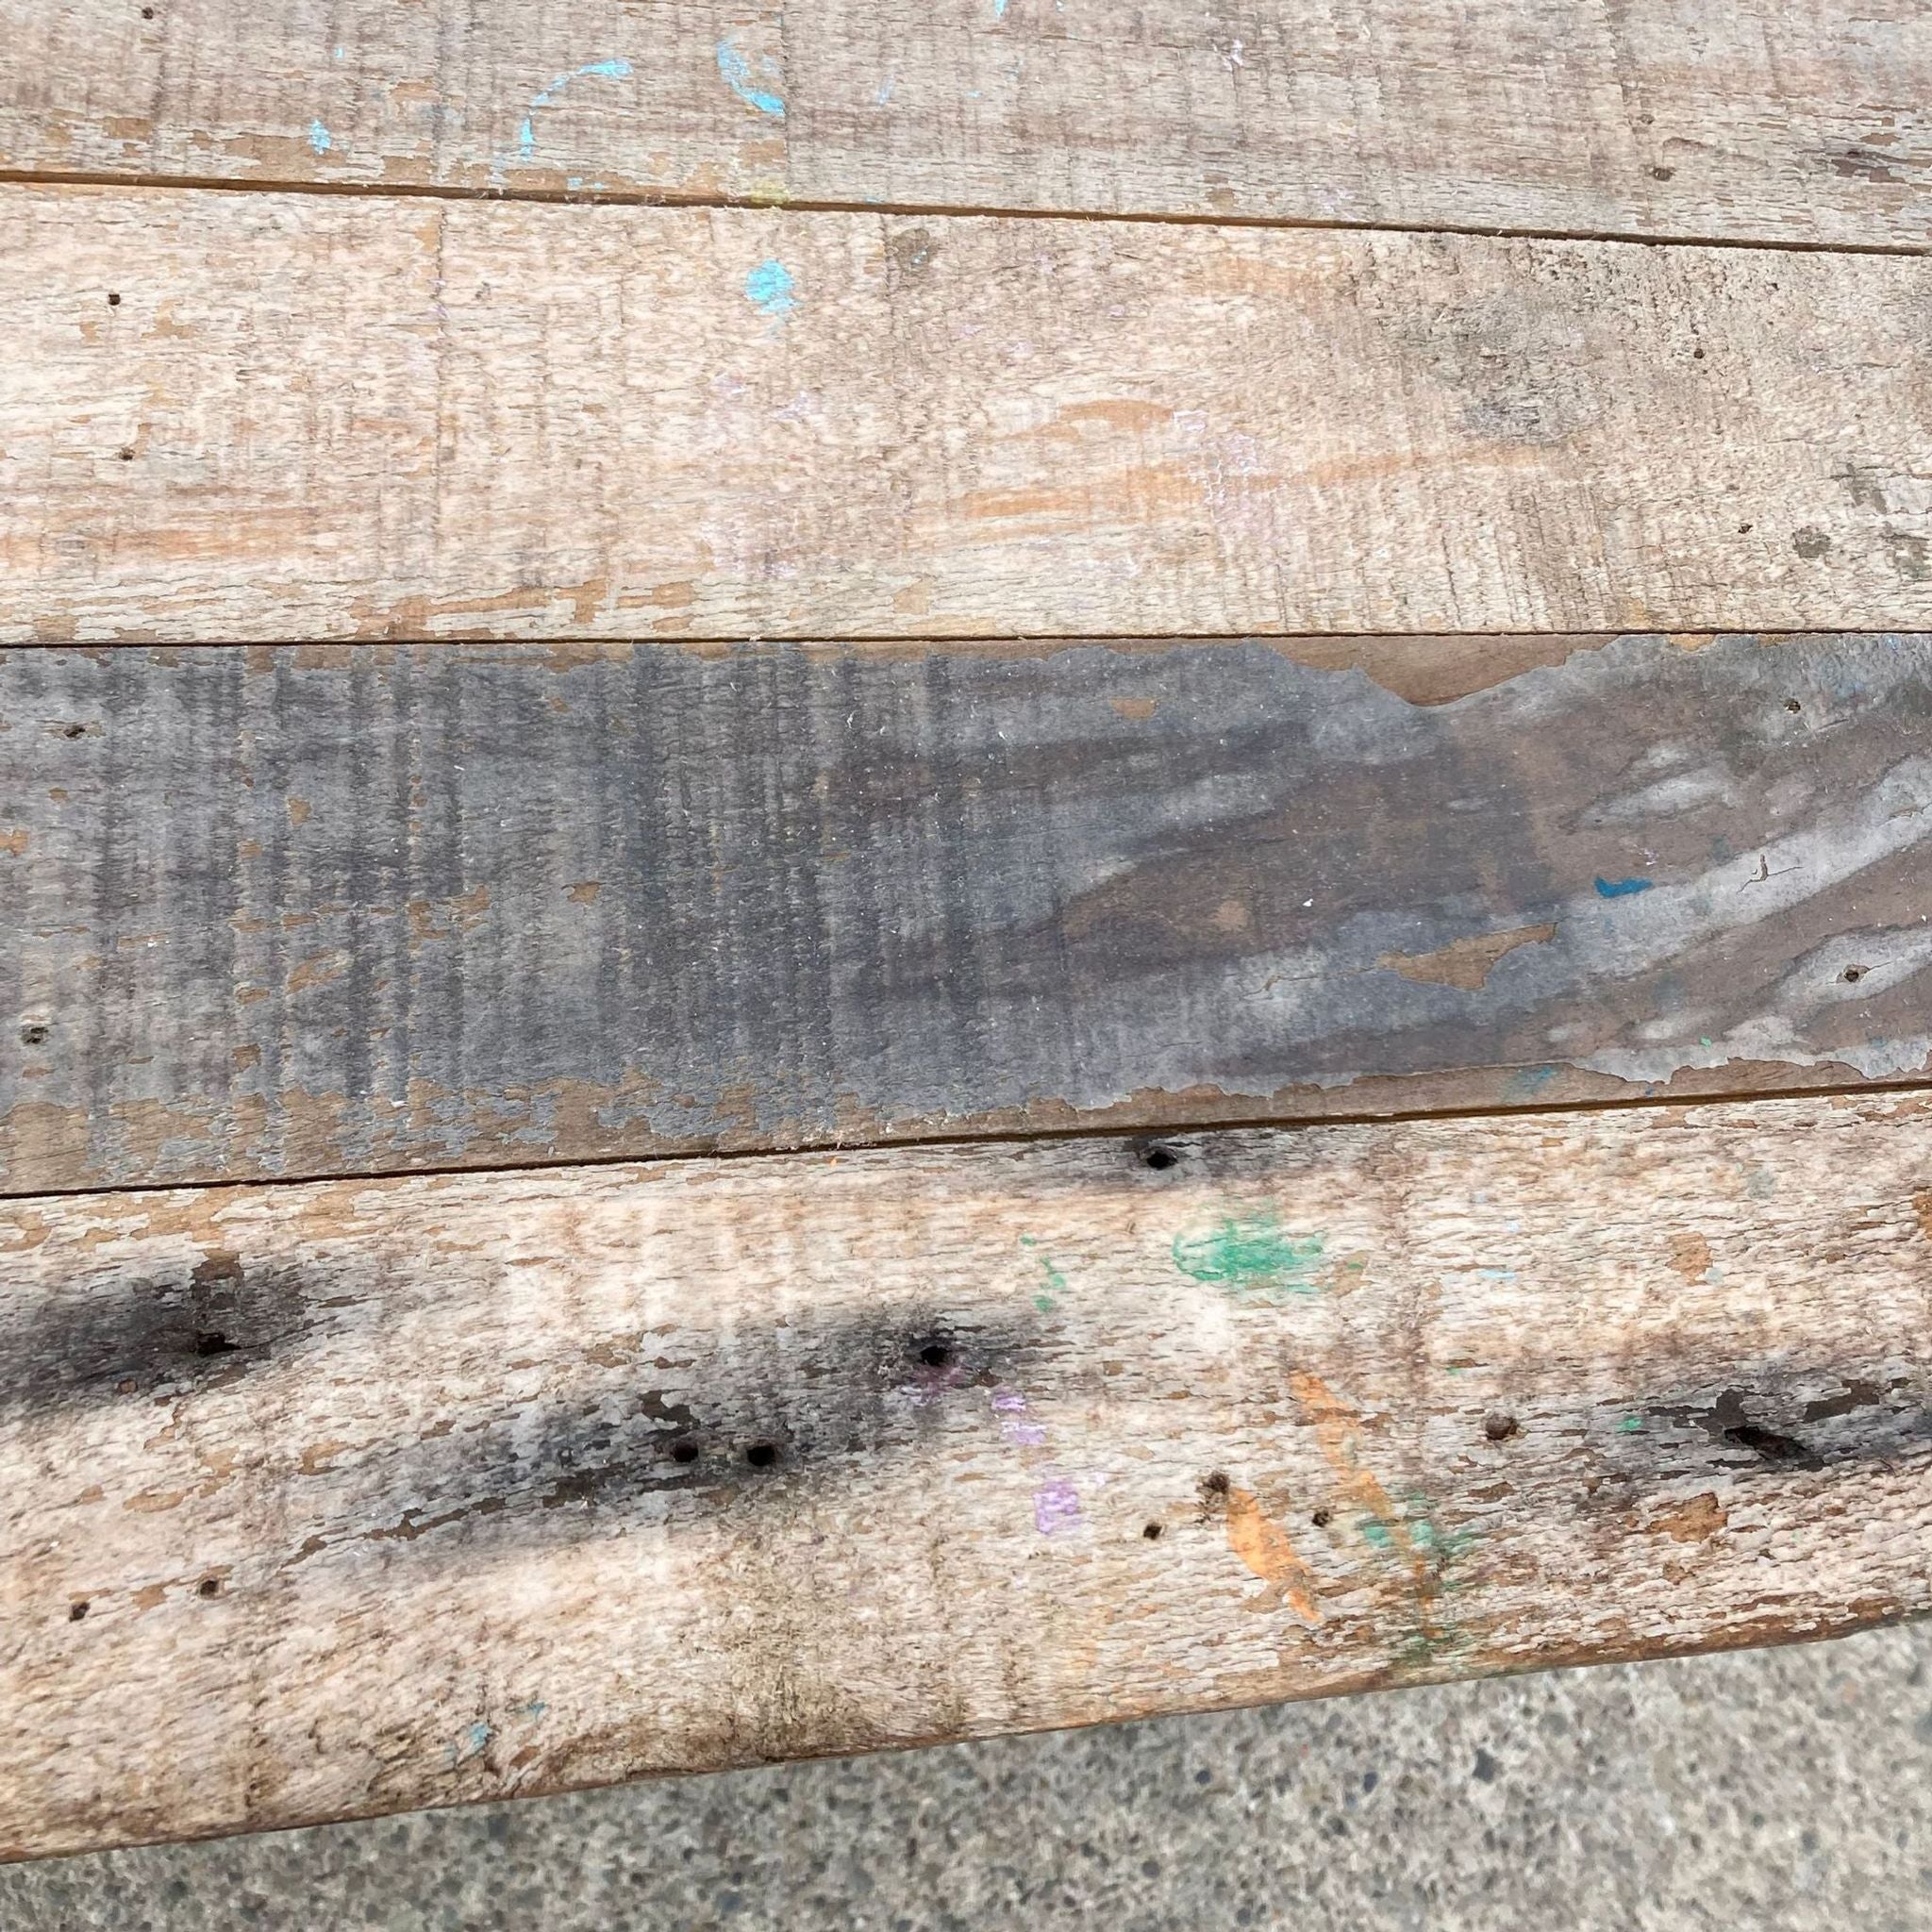 2. "Close-up texture of Reperch rustic recycled wood bench showing wood grain and color details."